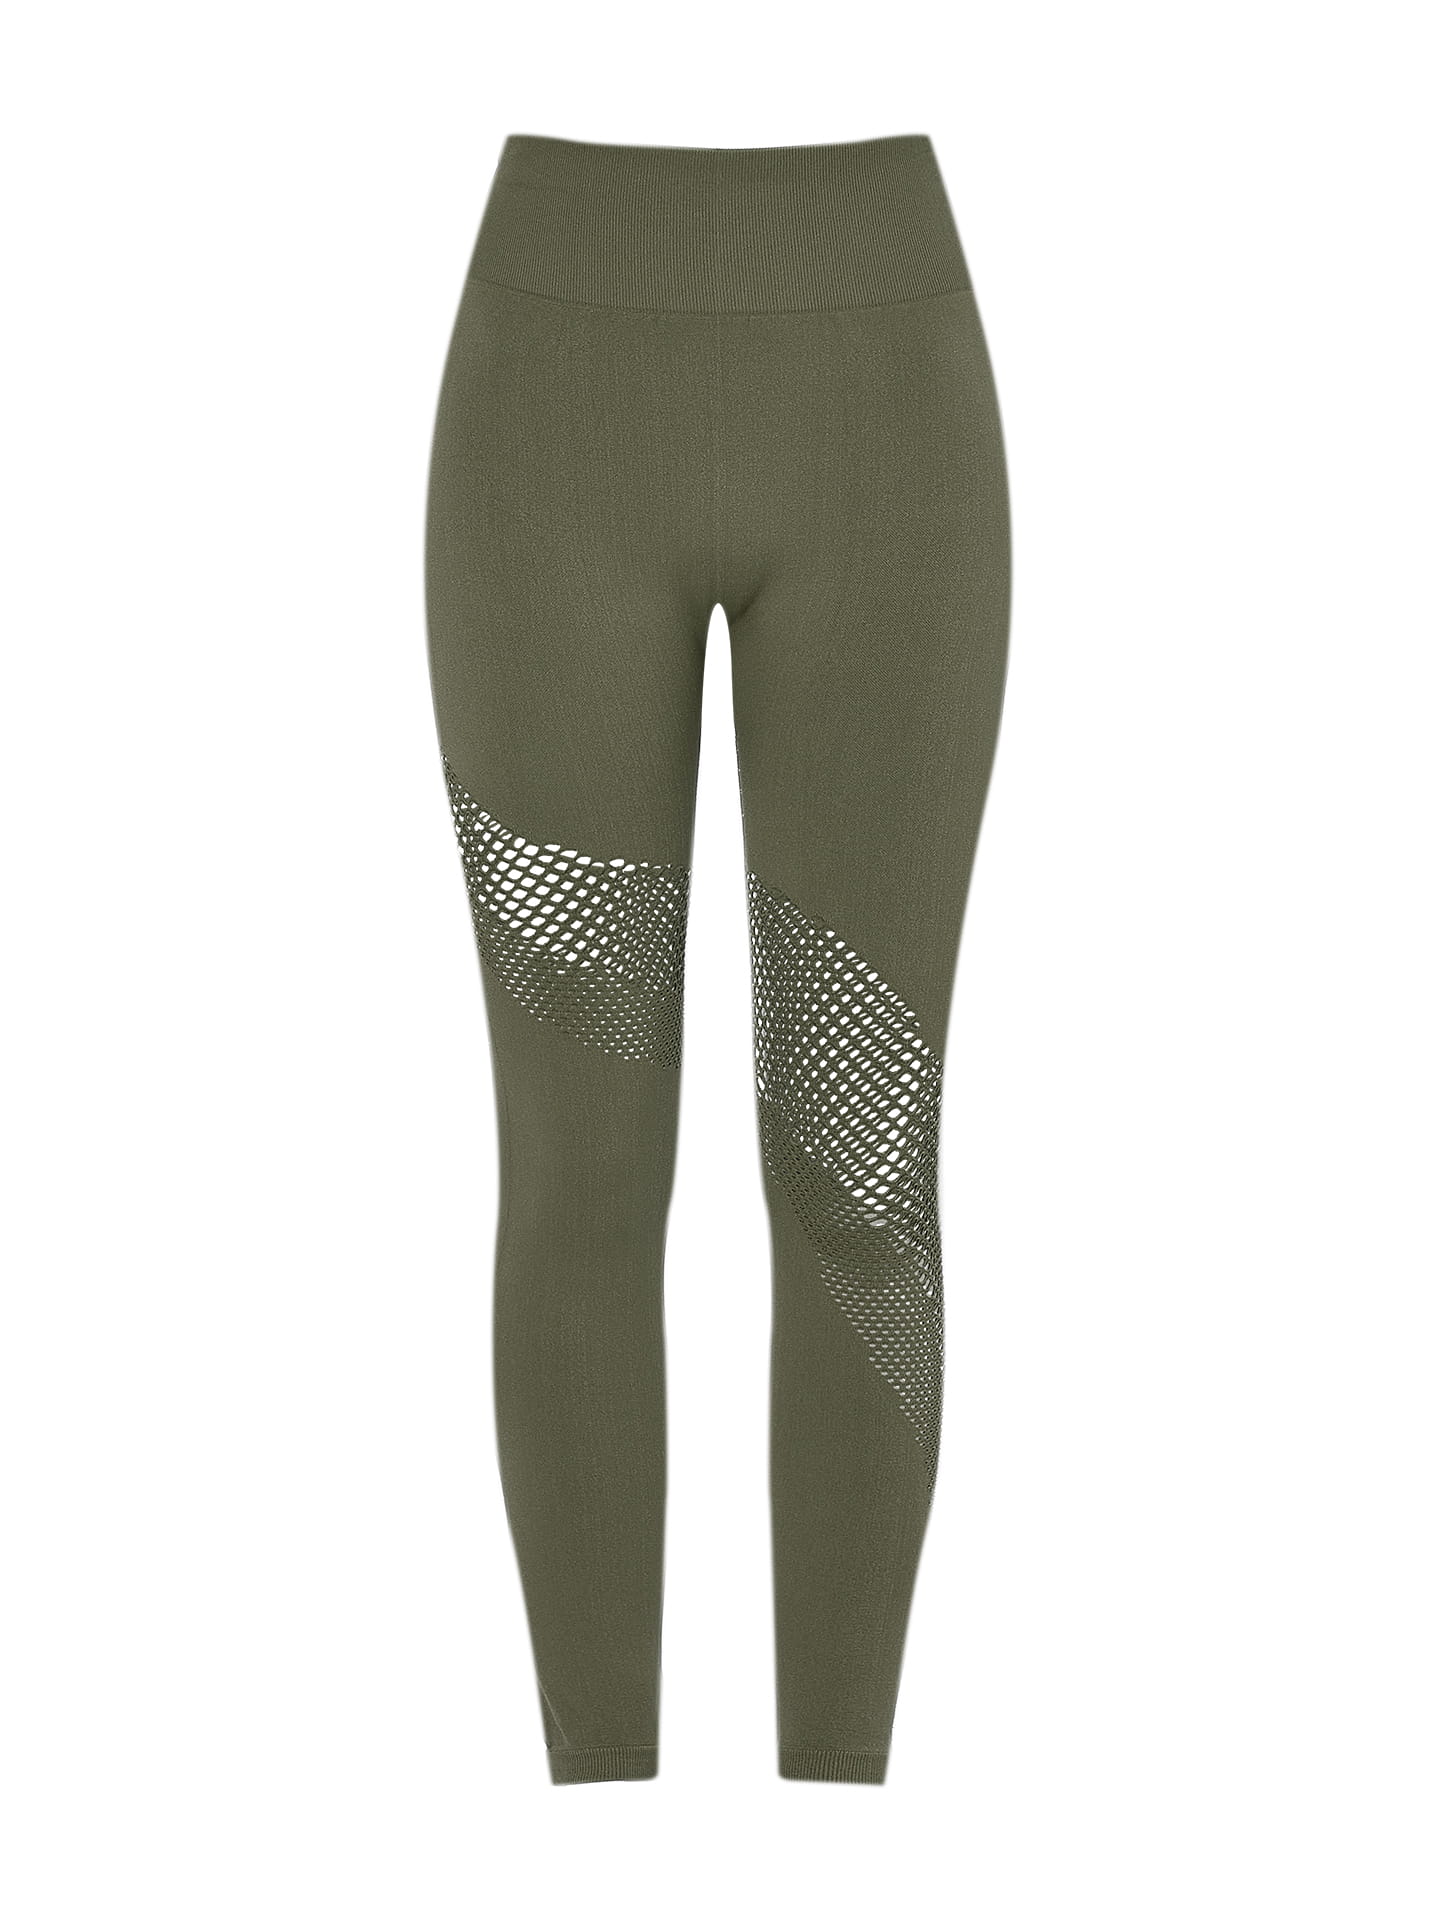 Leggings with perforated details in khaki, 9.99€